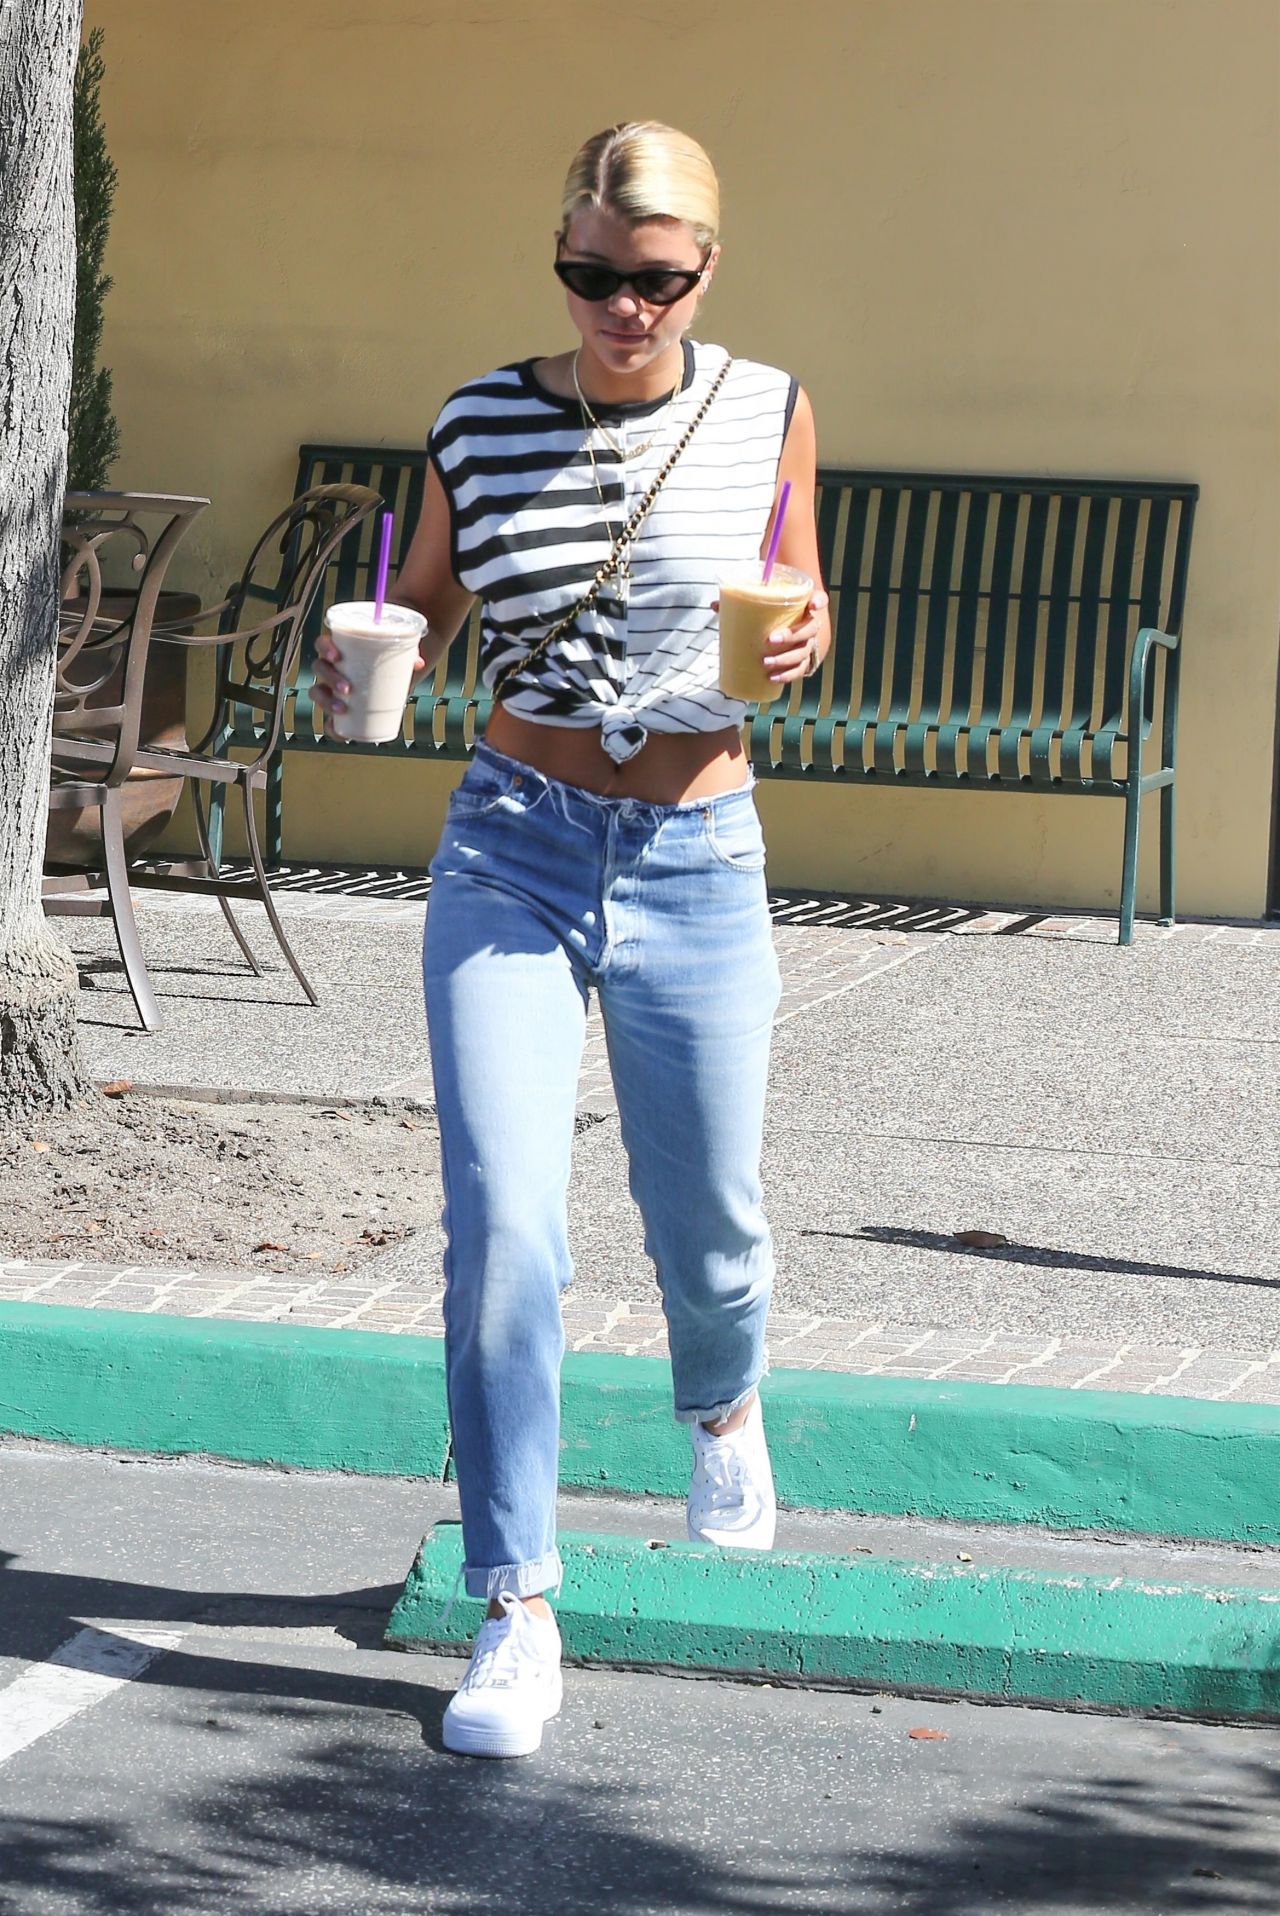 Sofia Richie Los Angeles March 7, 2017 – Star Style